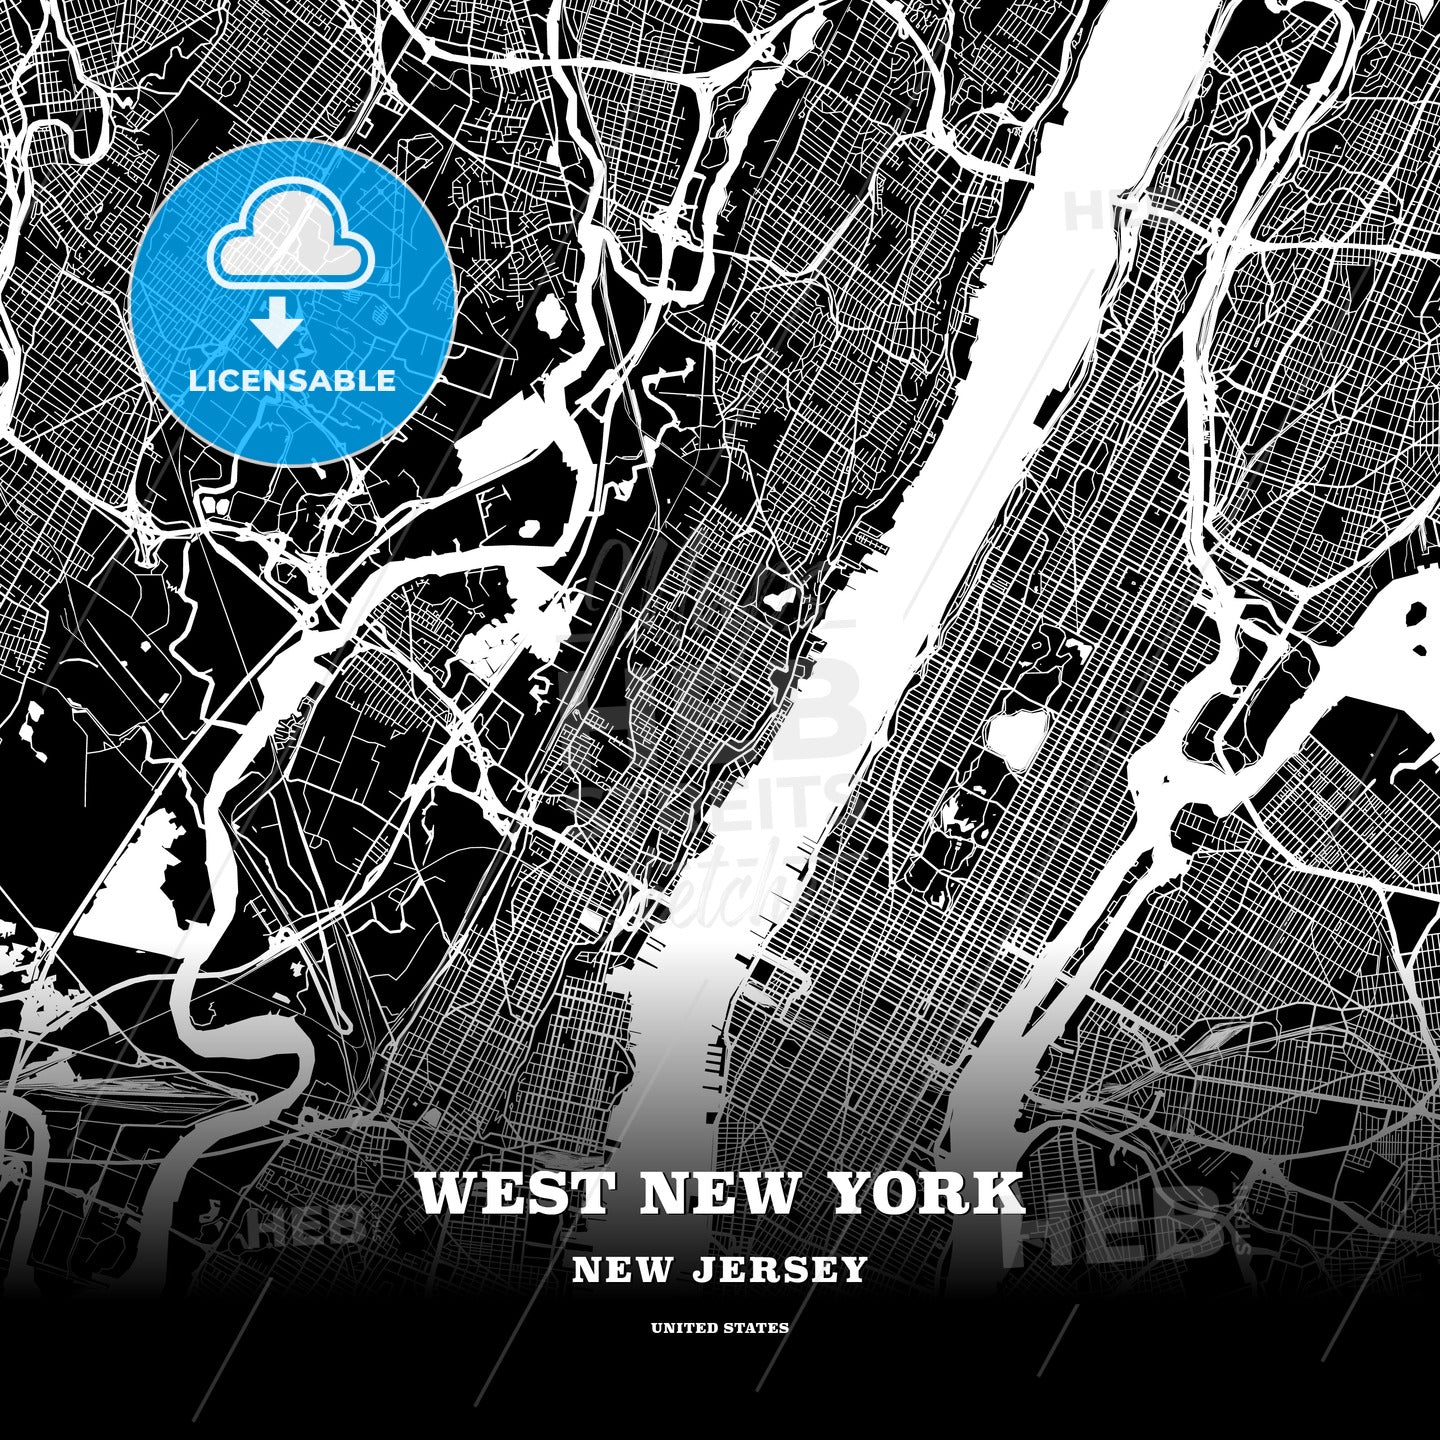 West New York, New Jersey, USA map